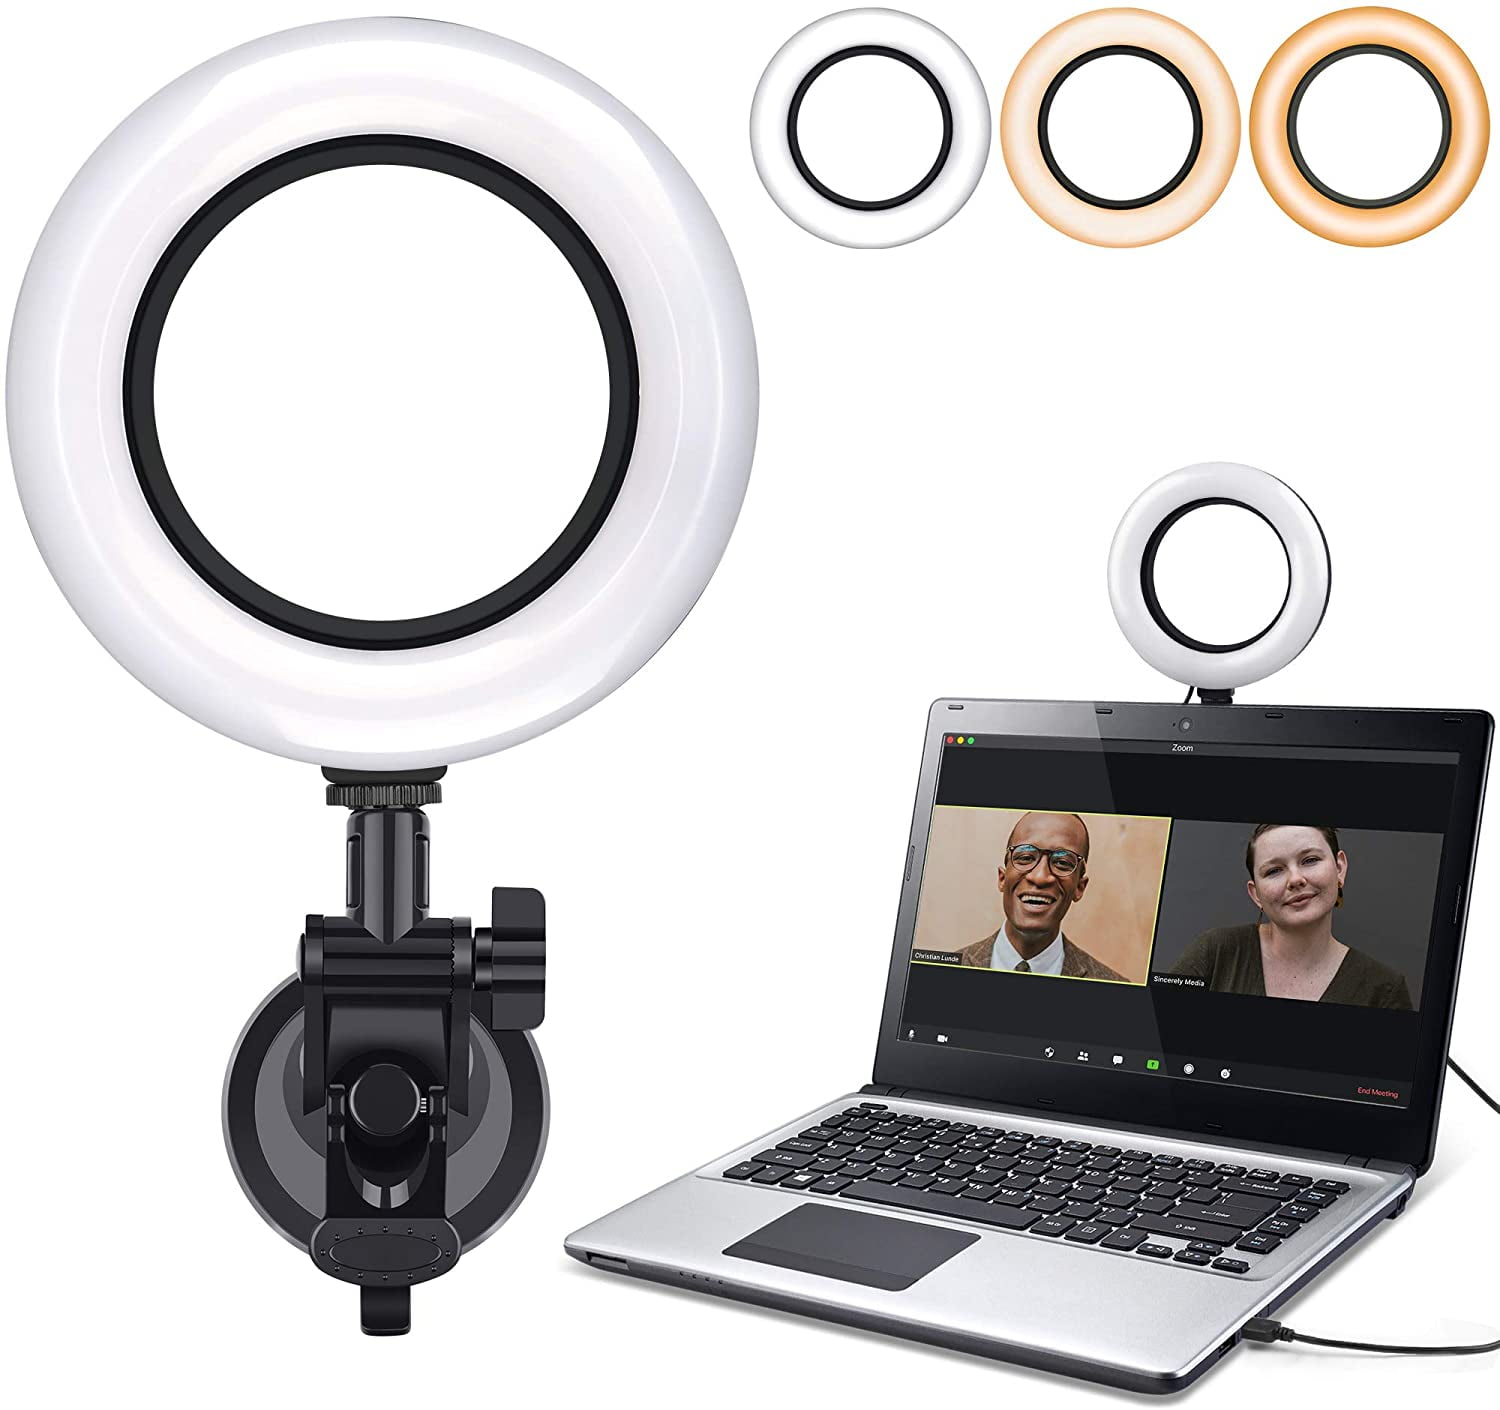 Distance Learning,Zoom Call Lighting,Self Broadcasting & Live Streaming Laptop Video Villsure Video Conference Lighting 6.3 Selfie Ring Light with Clamp Mount Webcam Light for Remote Working 